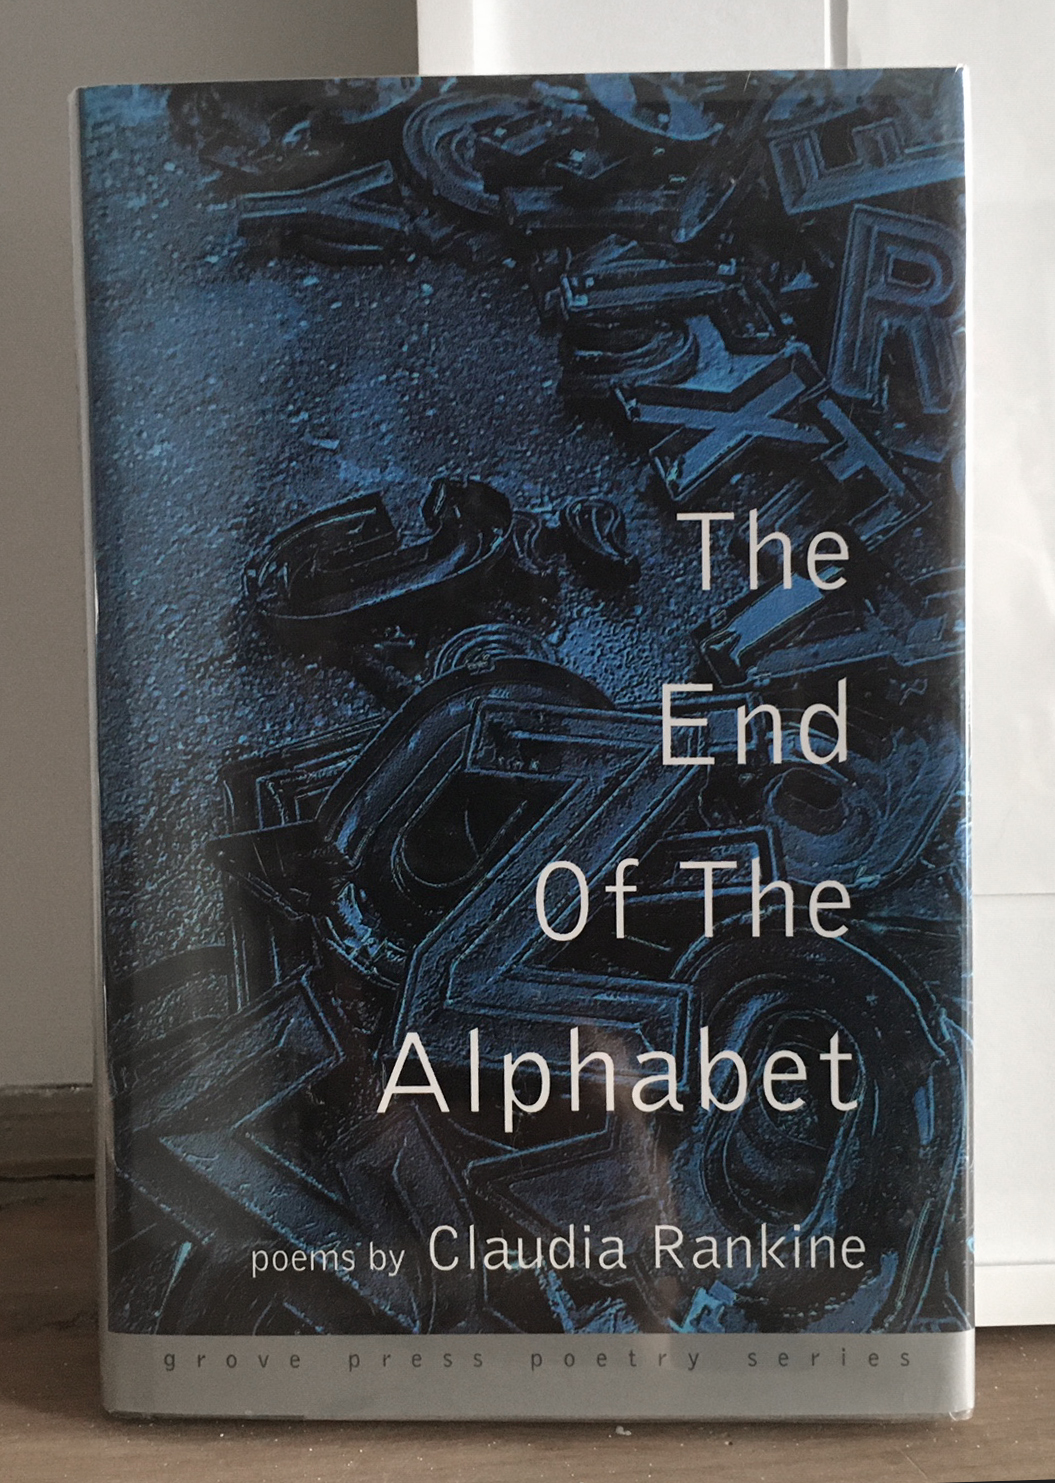 Claudia Rankine, The End of the Alphabet, 1996